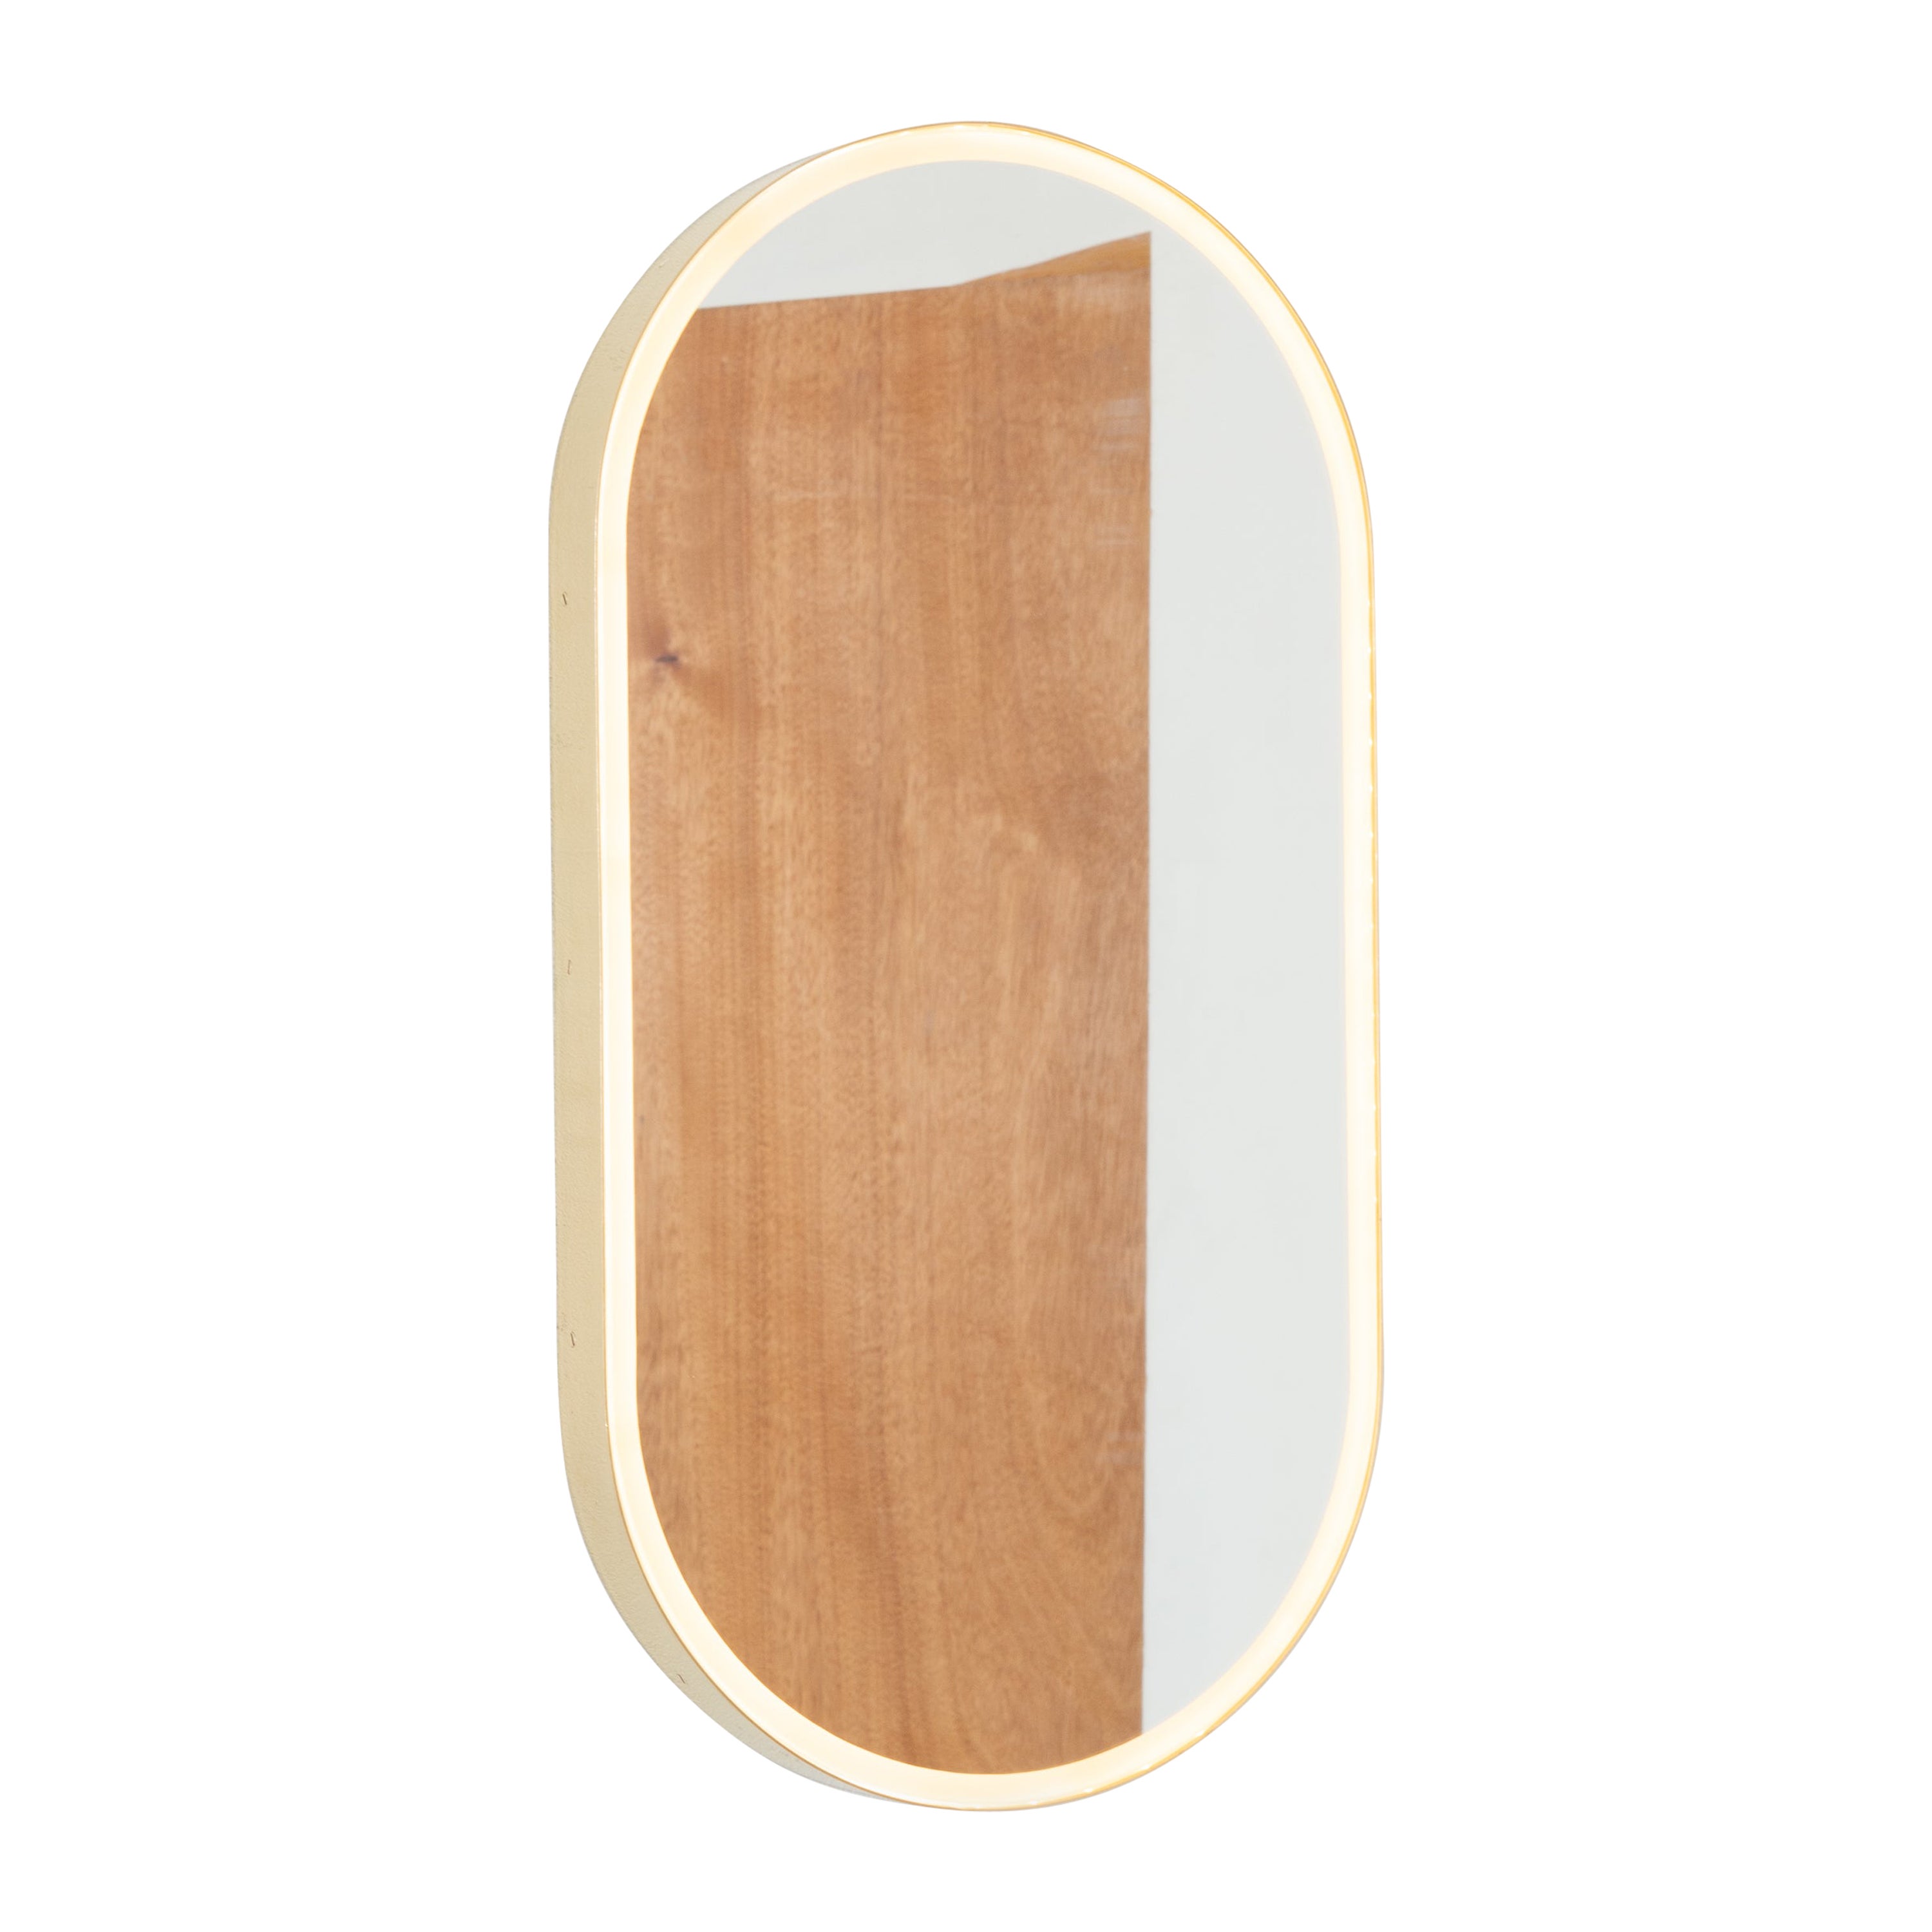 Capsula Illuminated Capsule Shaped Customisable Mirror with Brass Frame, Large For Sale